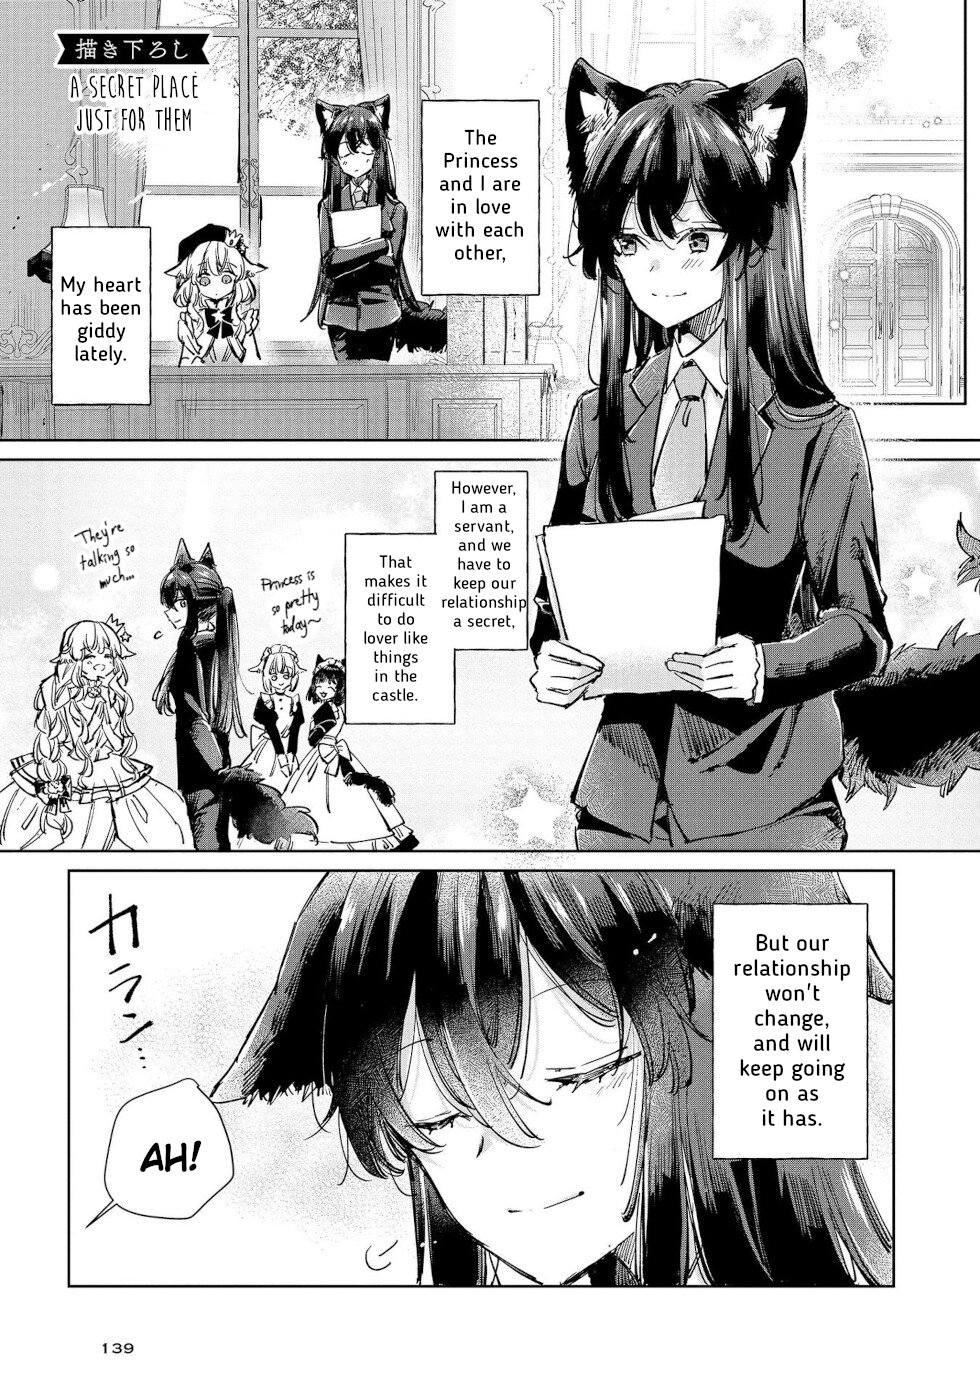 The Sheep Princess In Wolf's Clothing Vol.4 Chapter 22.5: A Secret Place Just For Them - Picture 1